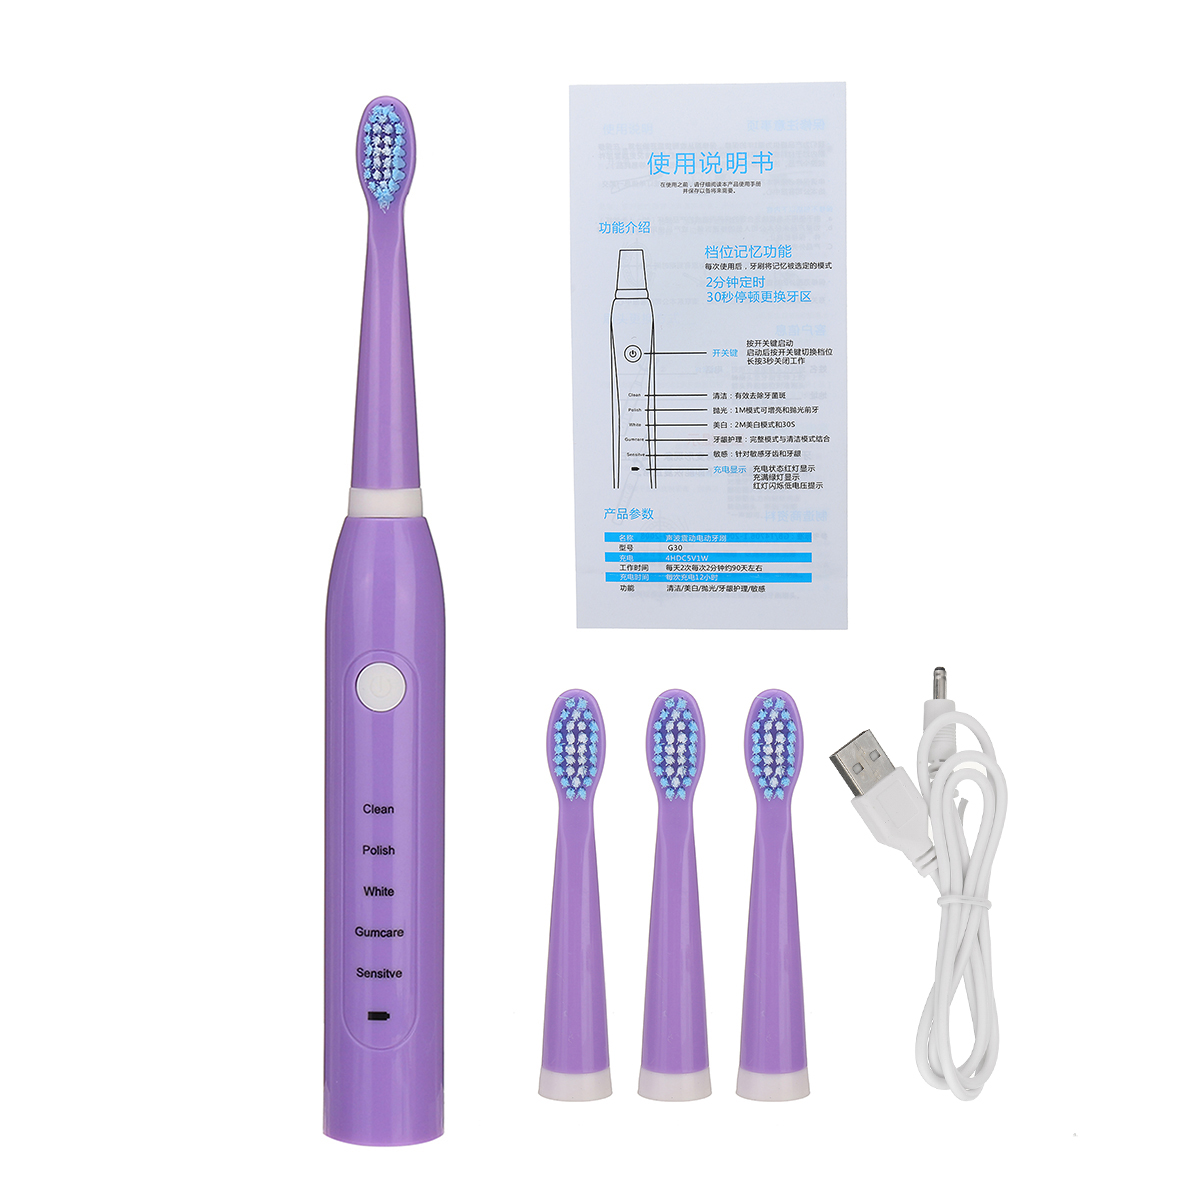 

Oral Care Electric Sonic Toothbrush 5 Modes Vibration Rechargeable Waterproof Teeth Cleaning Tooth Brush with 4 Brush He